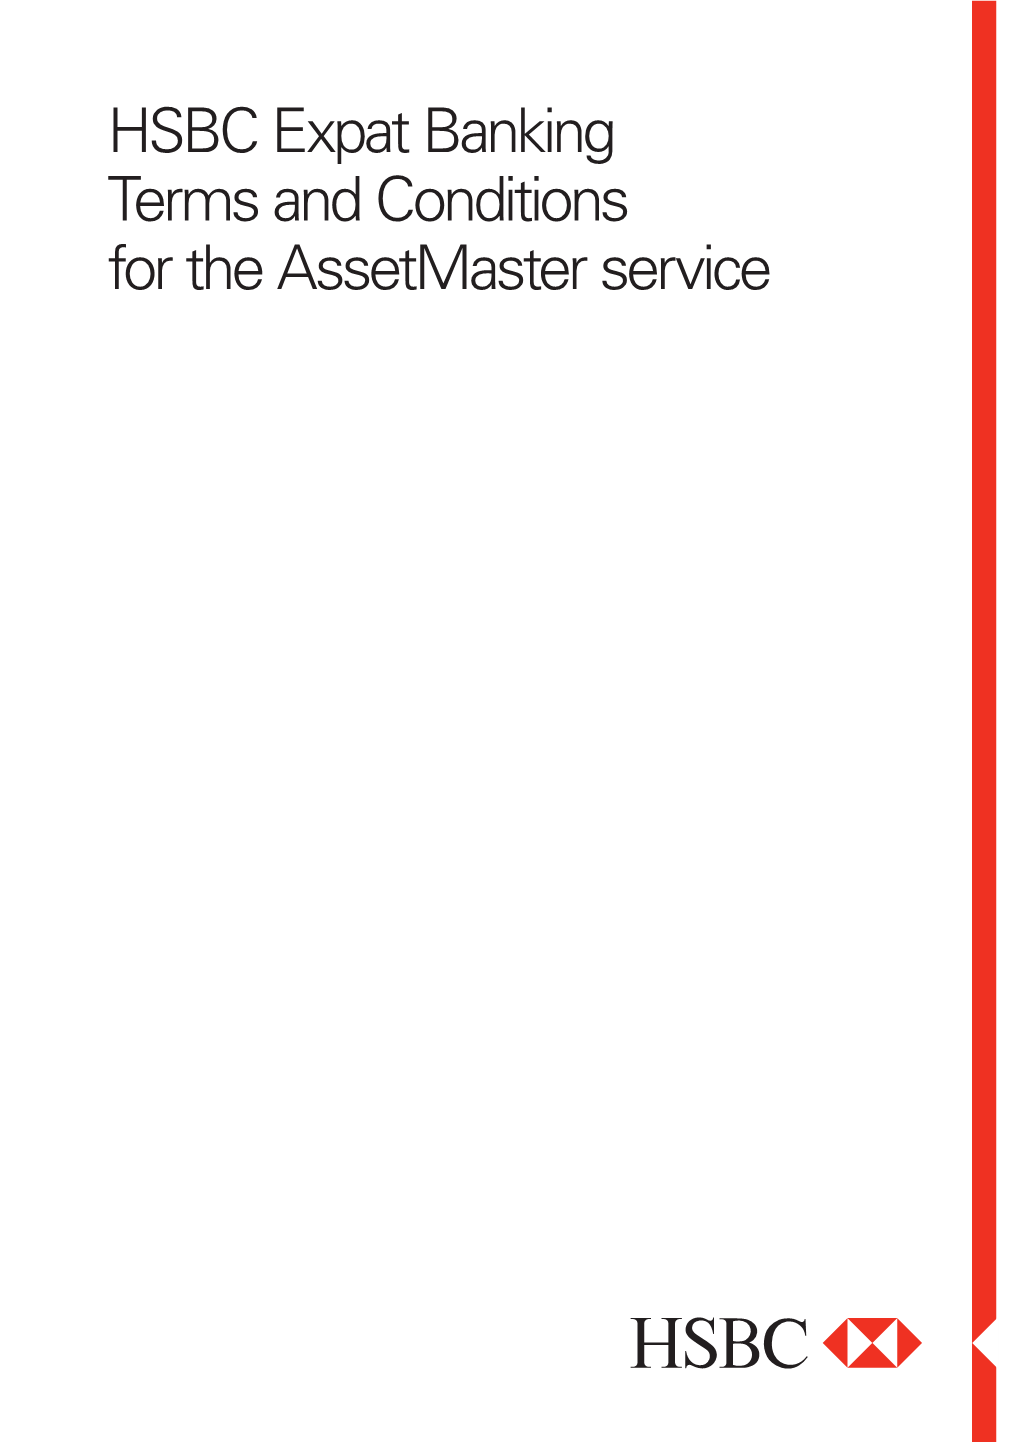 HSBC Expat Banking Terms and Conditions for the Assetmaster